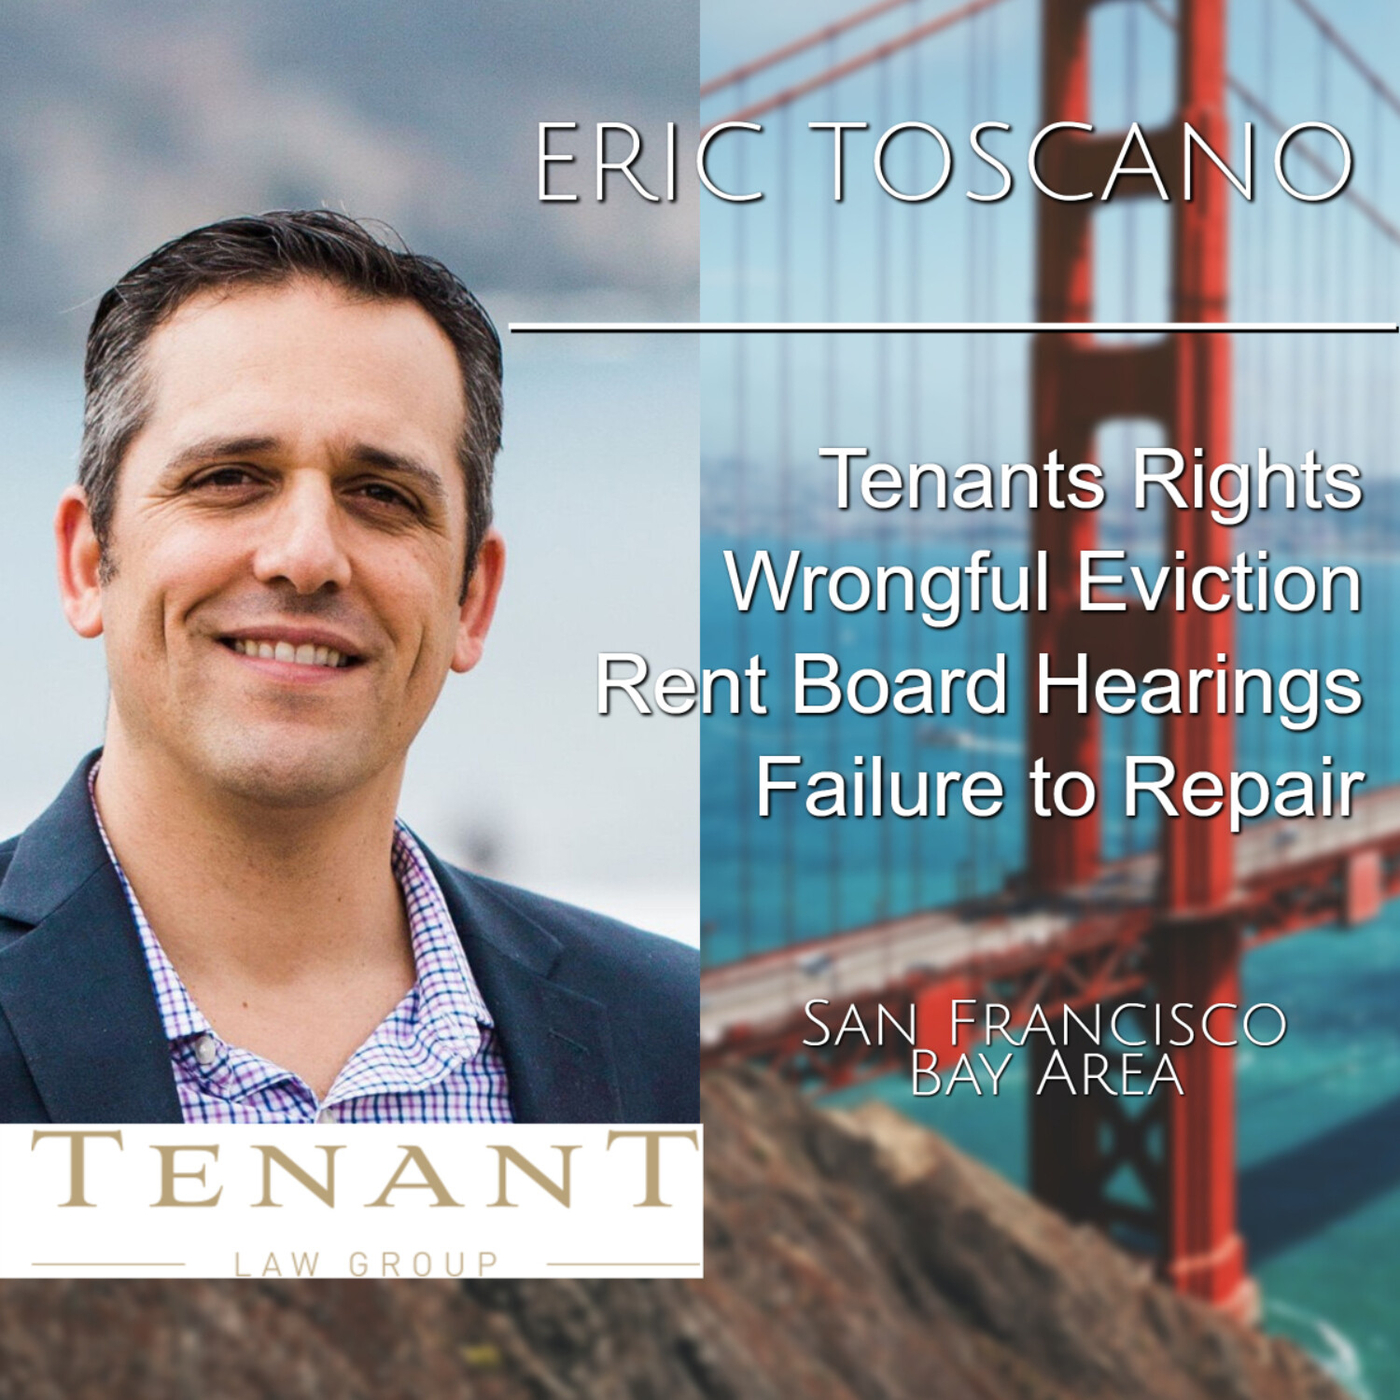 Eric Toscano Tenant Law Group San Francisco Landlord Law Oakland Tenant S Right Lawyer